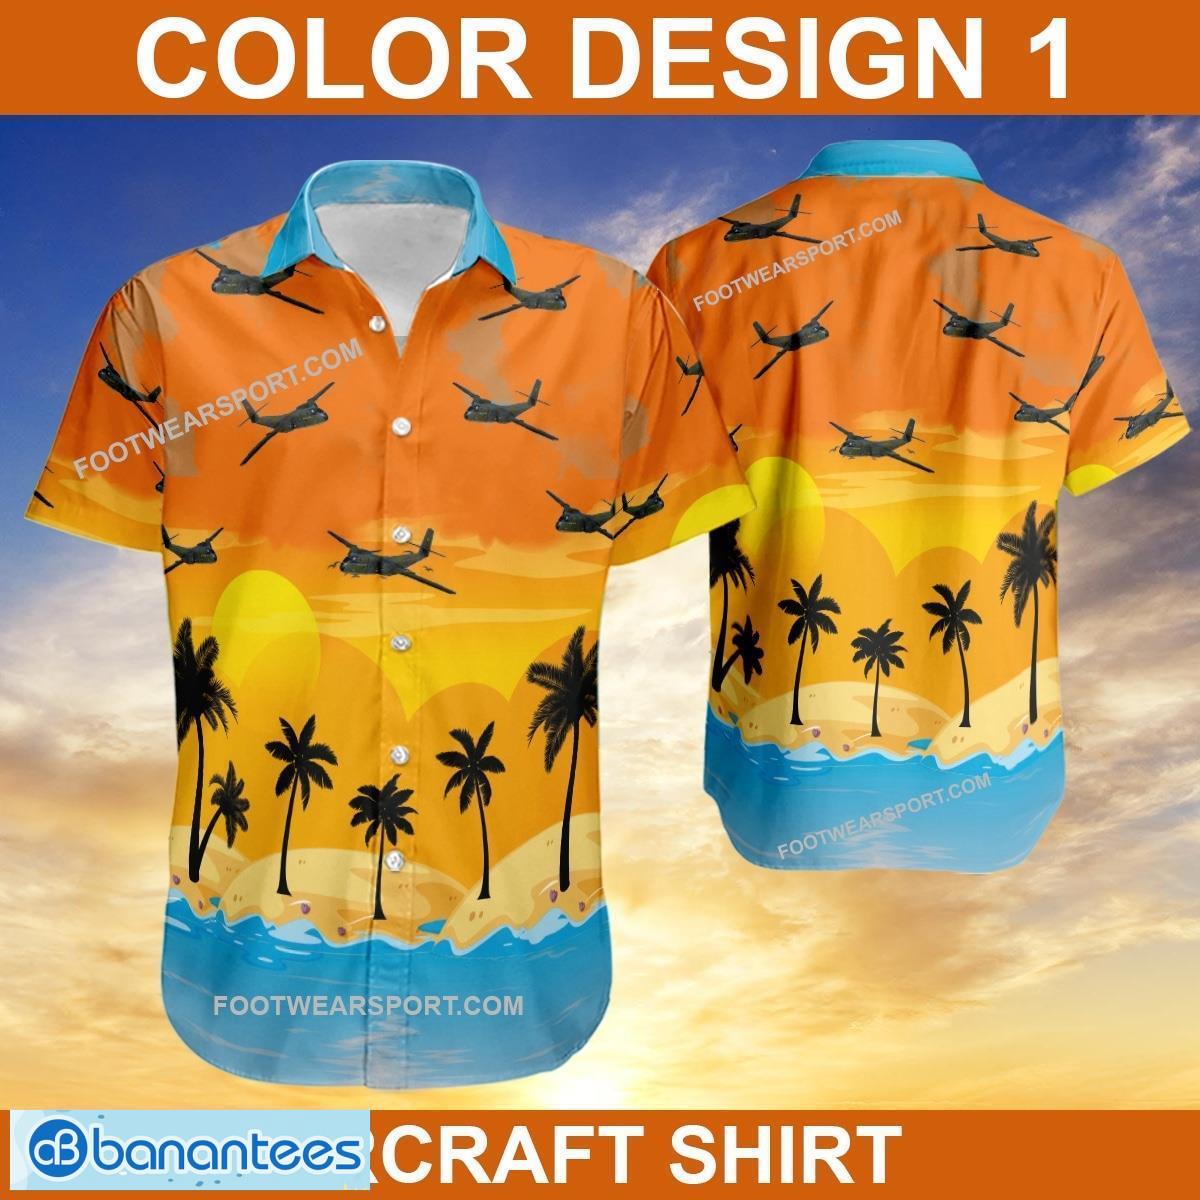 DHC-4 Caribou DHC4 Aircaft Hawaiian Shirt Color Limited Edition - DHC-4 Caribou DHC4 Aircraft Hawaiian Shirt Style 1